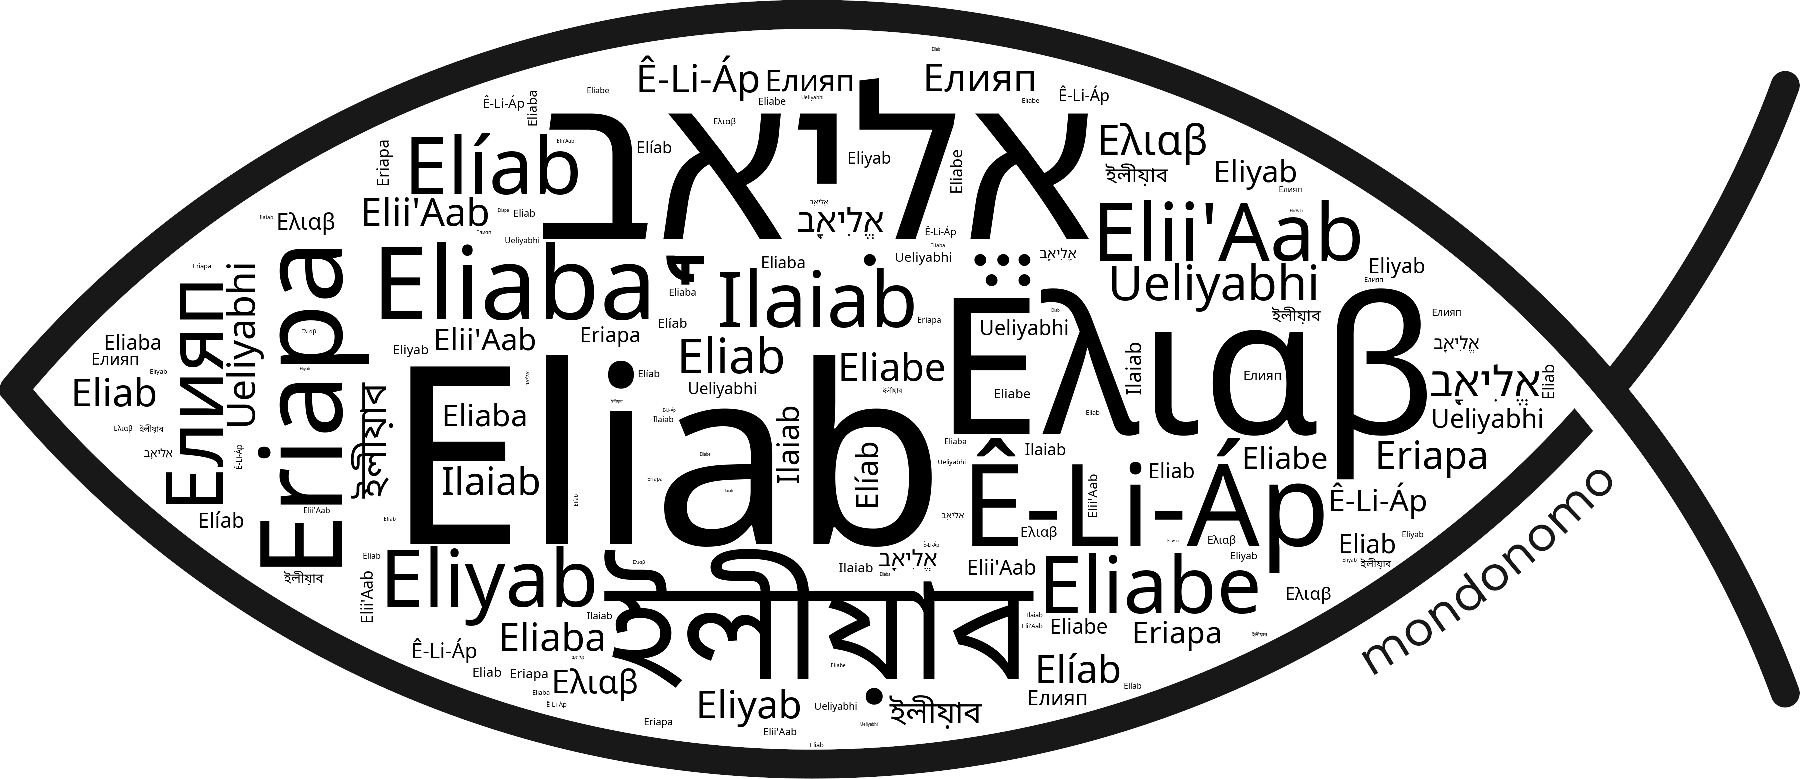 Name Eliab in the world's Bibles